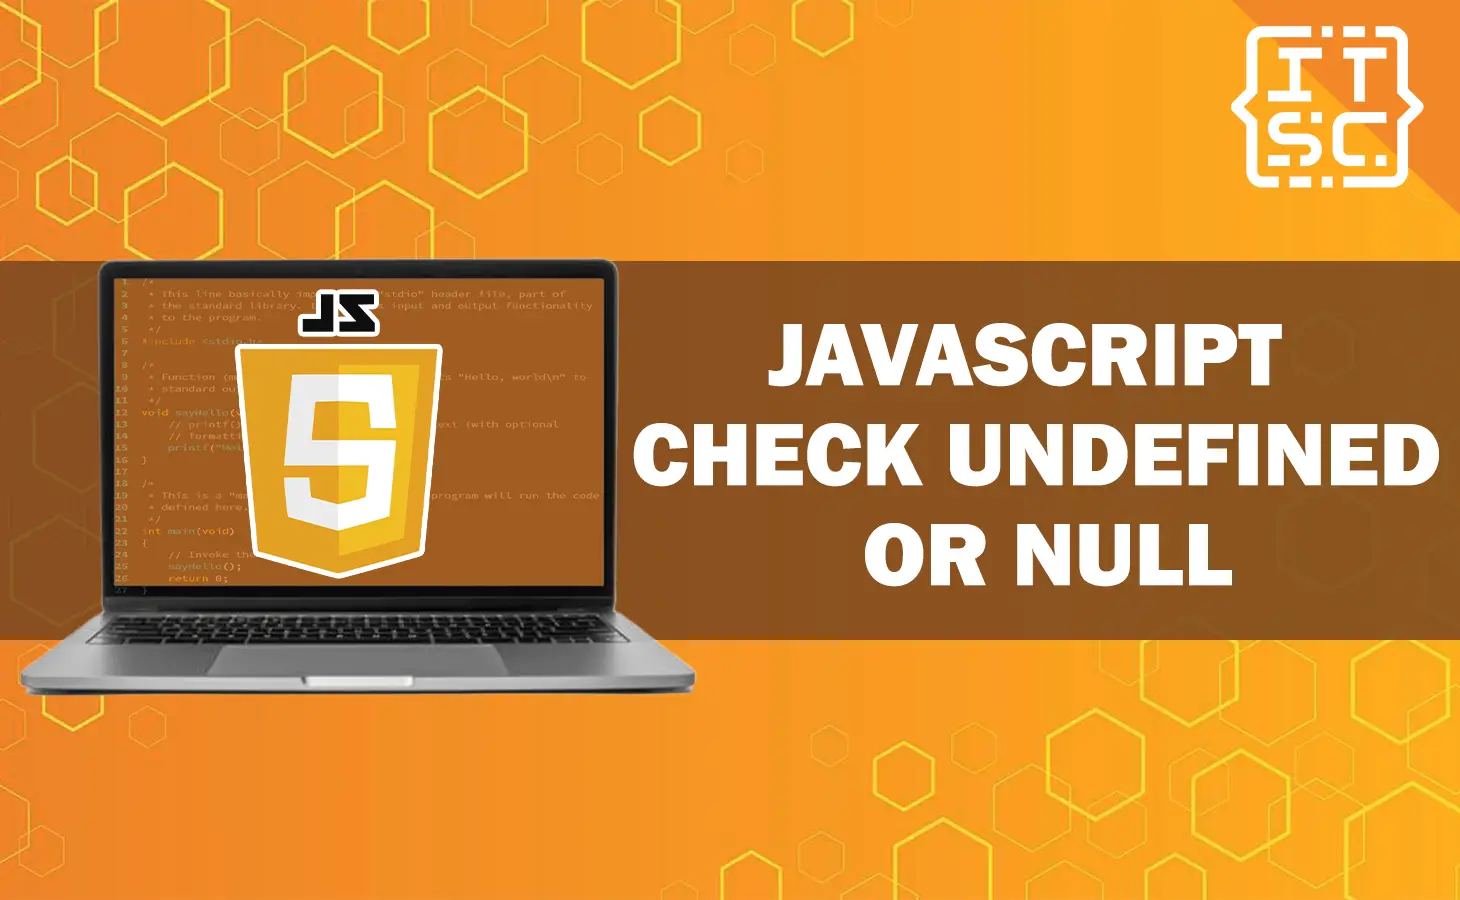 How to check if variable is undefined or null in JavaScript?